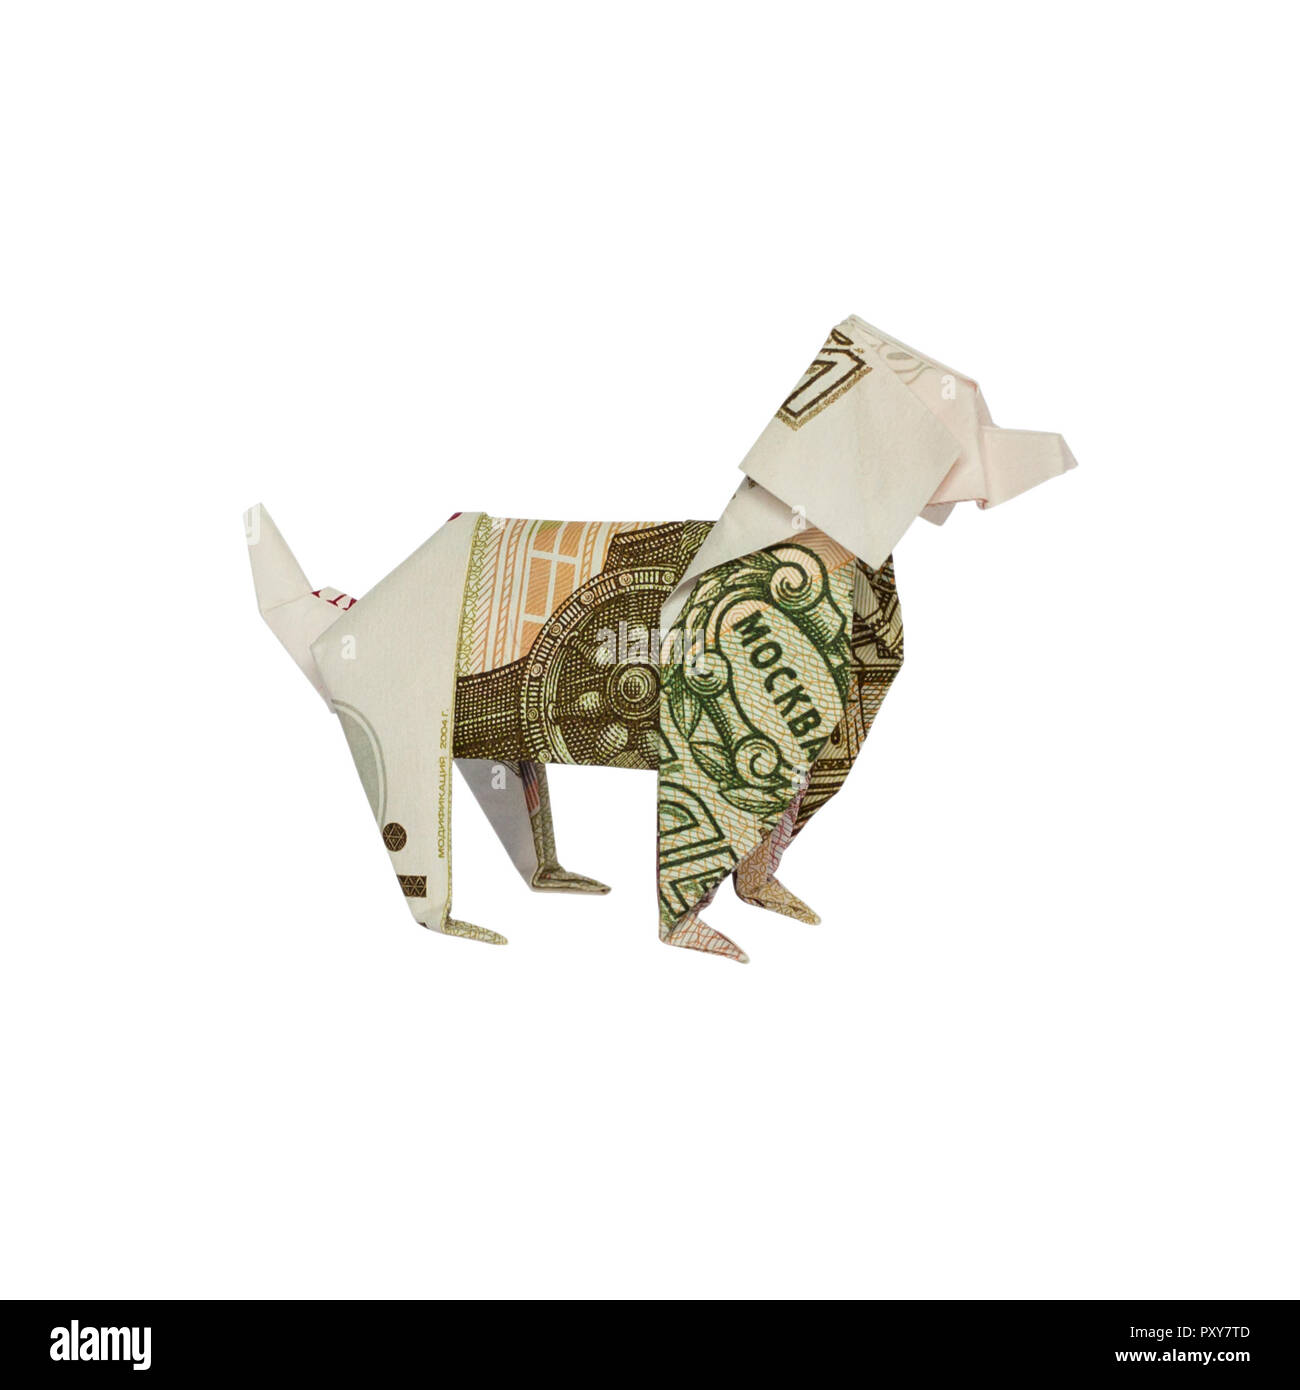 Money Origami Moscow DOG Folded with 100 Russian Rubles Bill Isolated on White Background Stock Photo